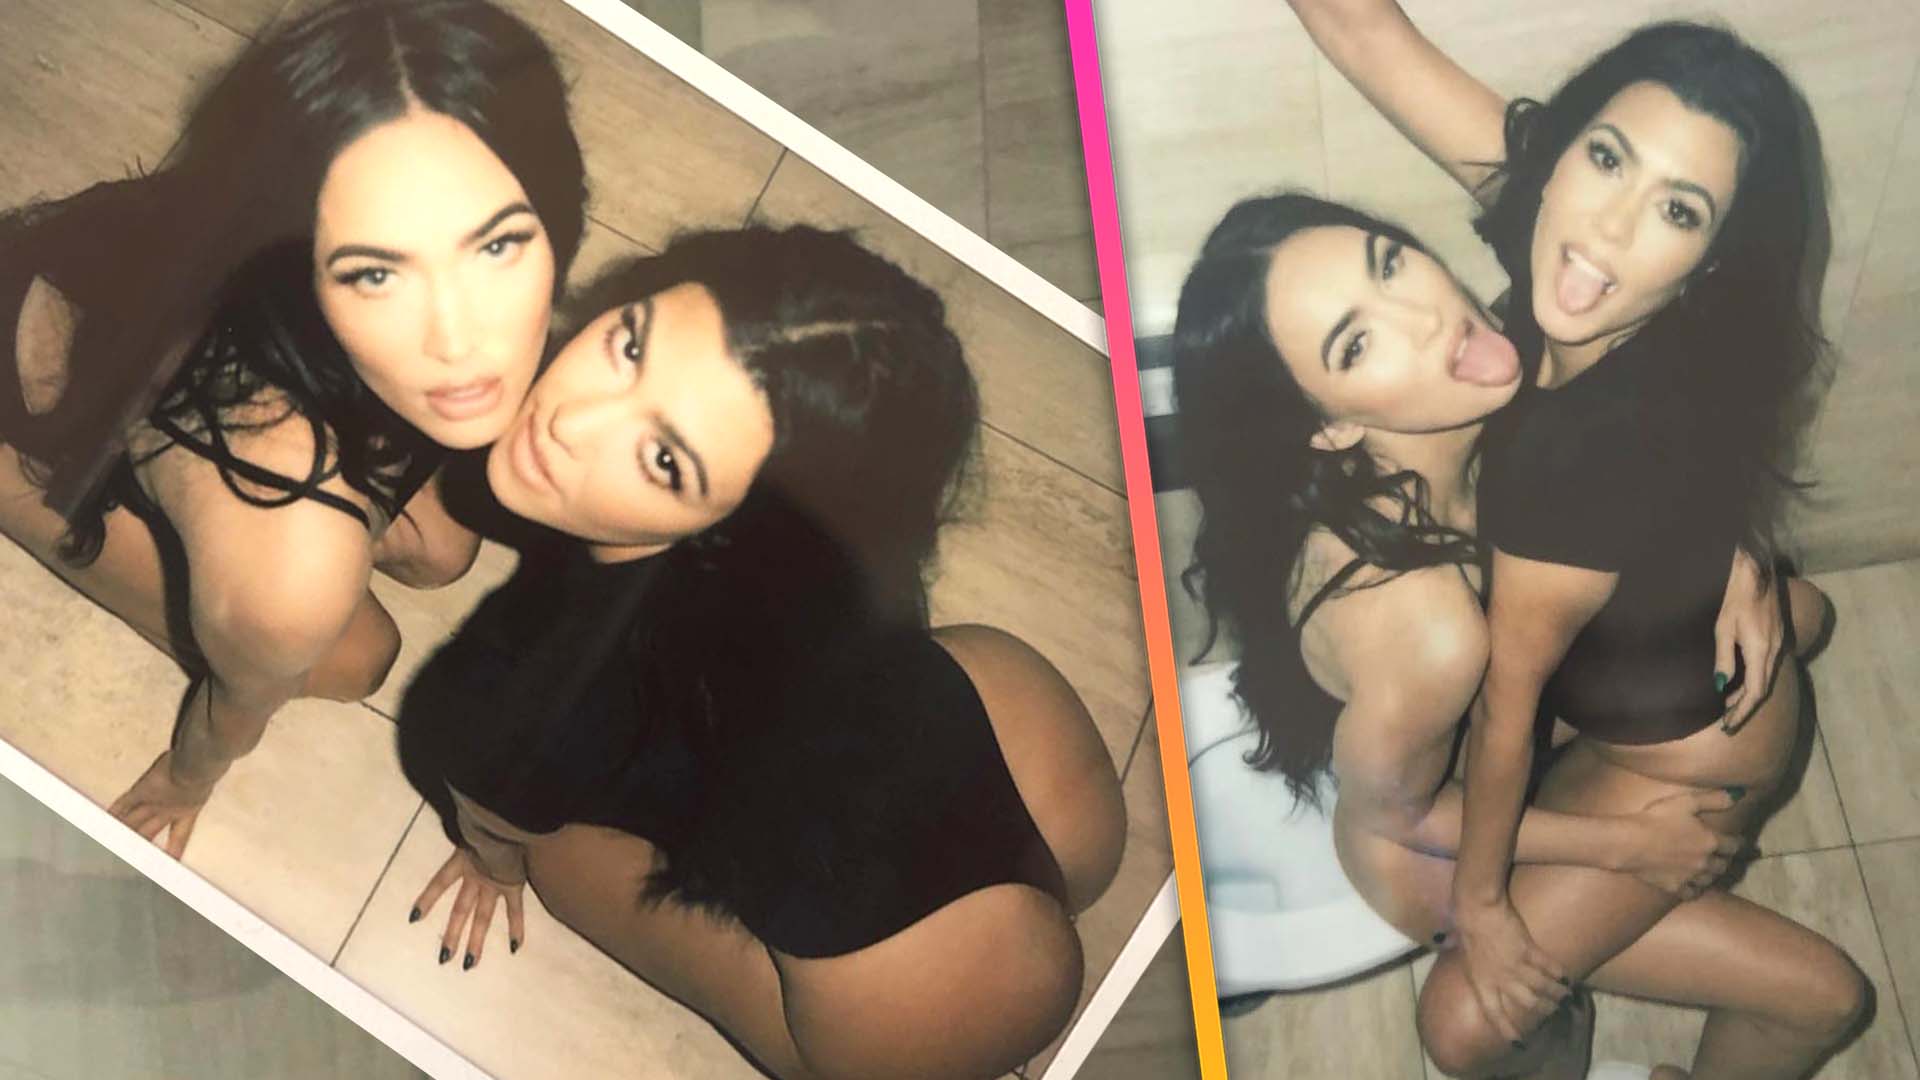 Megan Fox Shares Sexy Pics of Her and Kourtney Kardashian: 'Should We Start  an OnlyFans?' | Entertainment Tonight